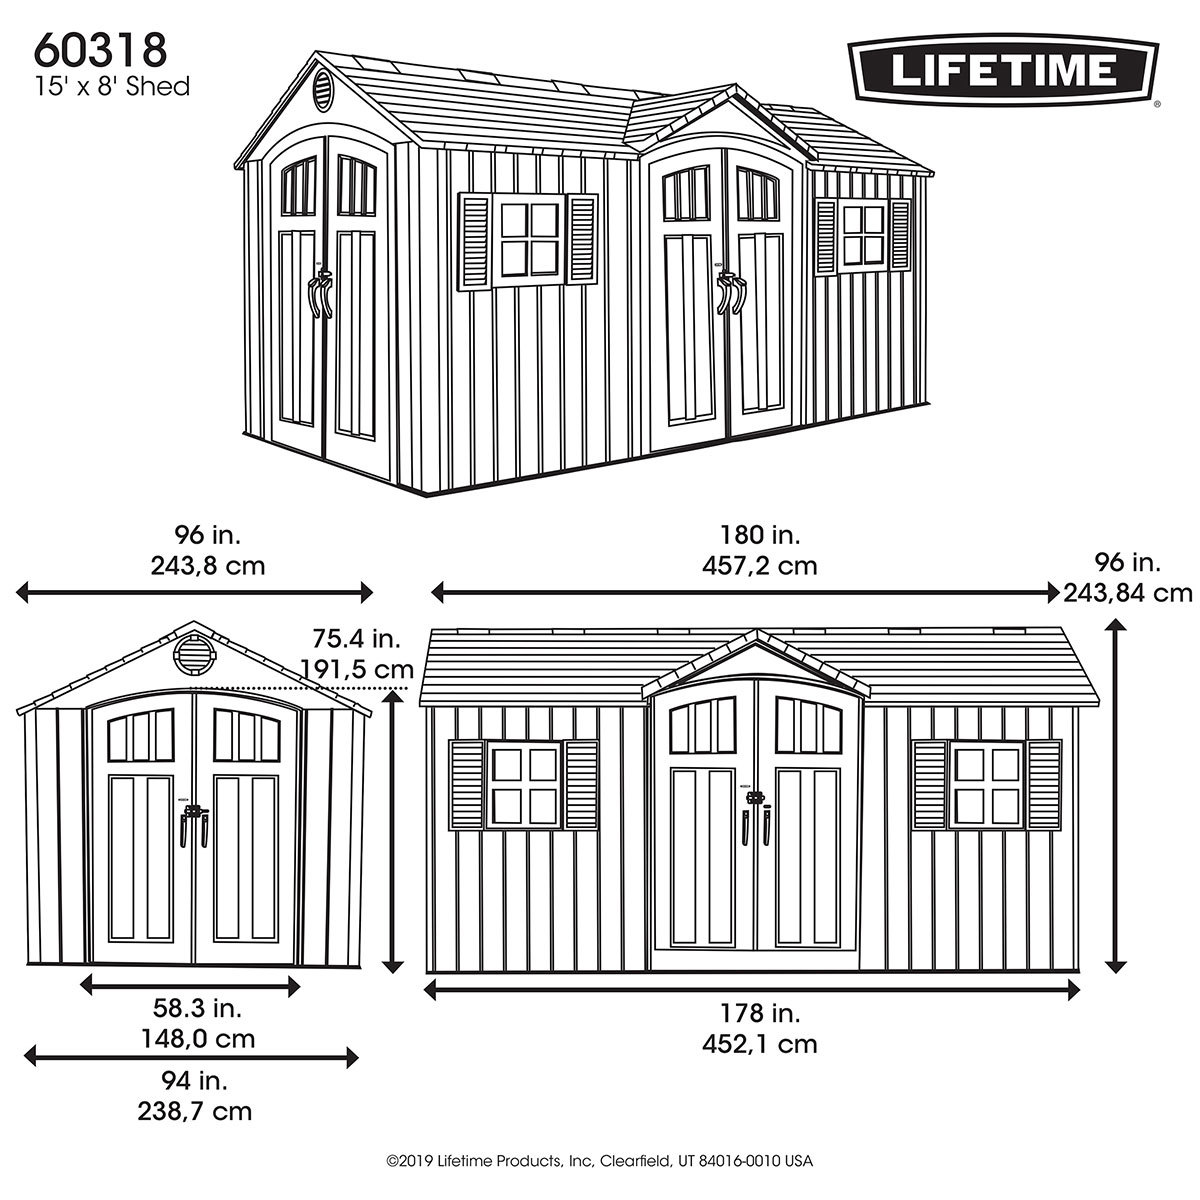 Exterior dimensions of Lifetime 15ft x 8ft storage shed